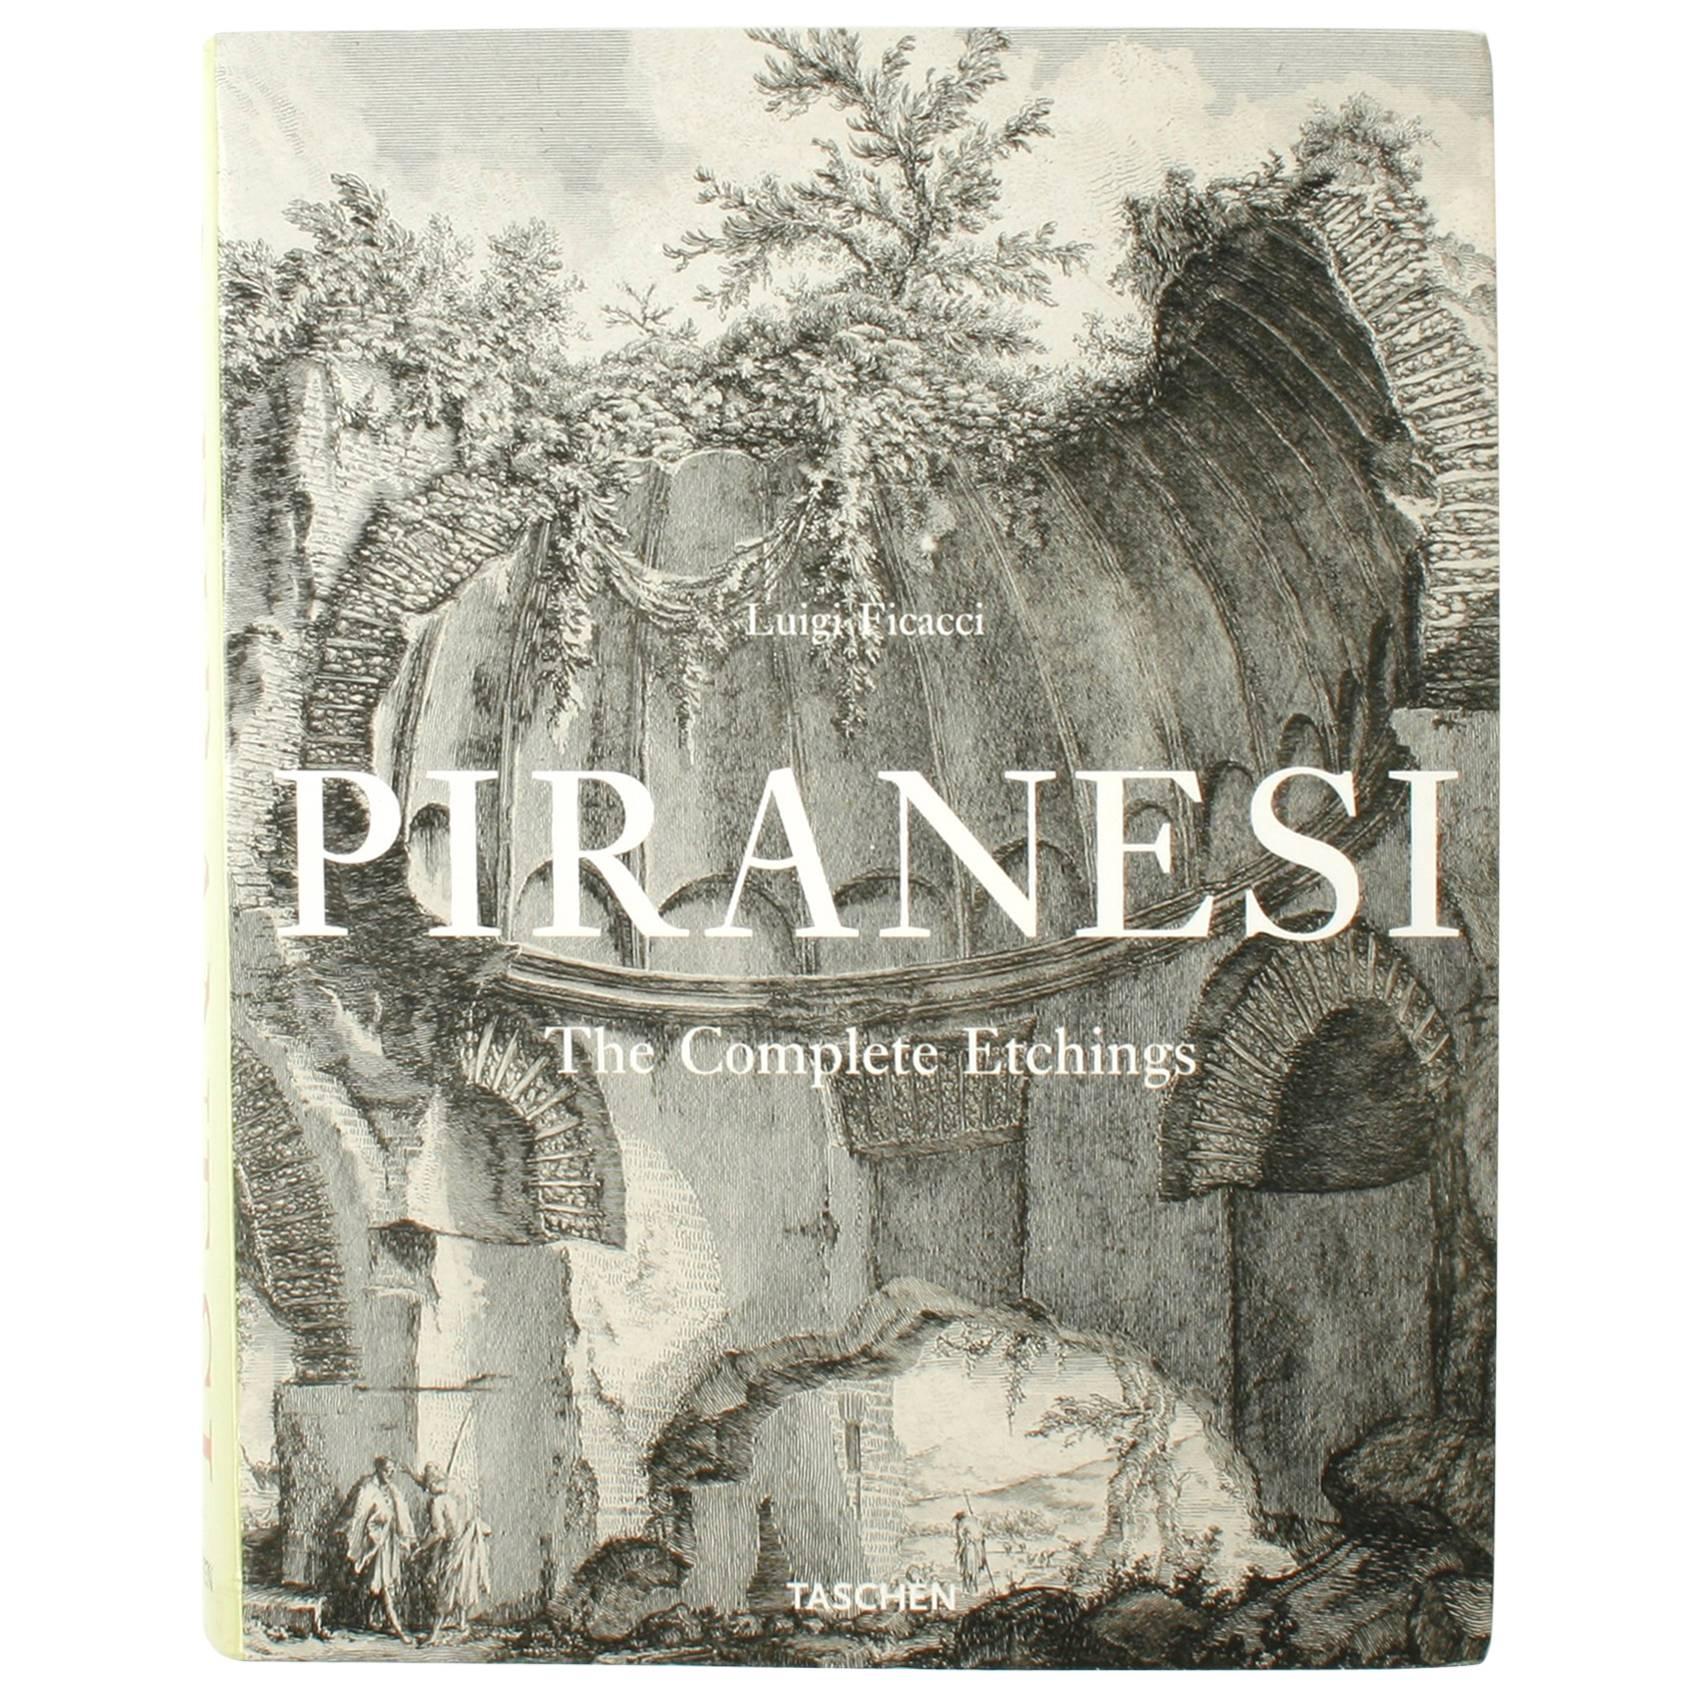 Piranesi, The Complete Etching by Giovanni Battista, 1st Edition